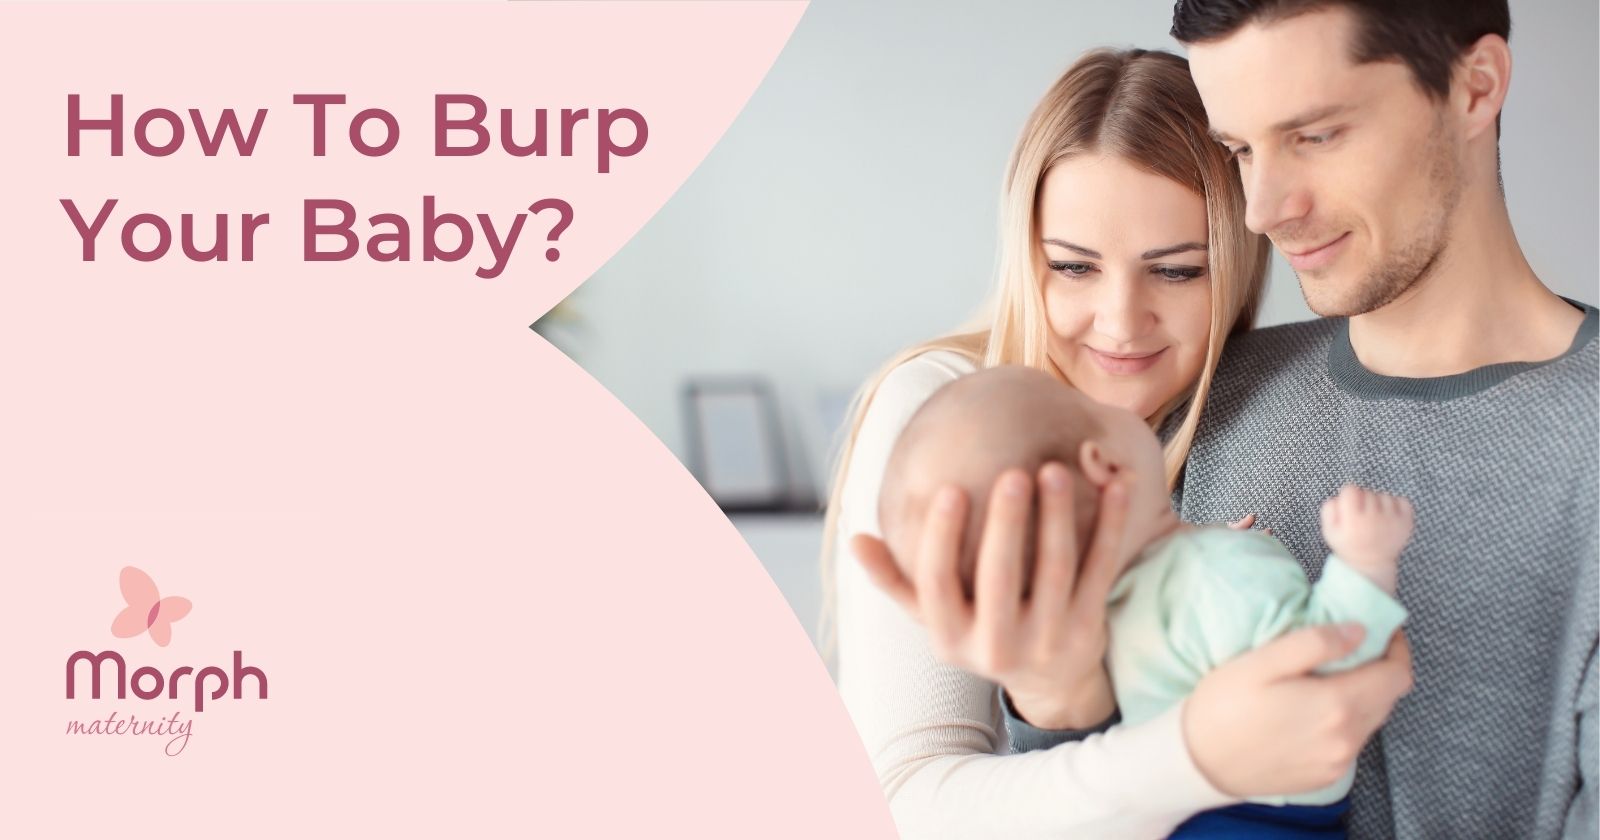 How To Burp Your Baby?